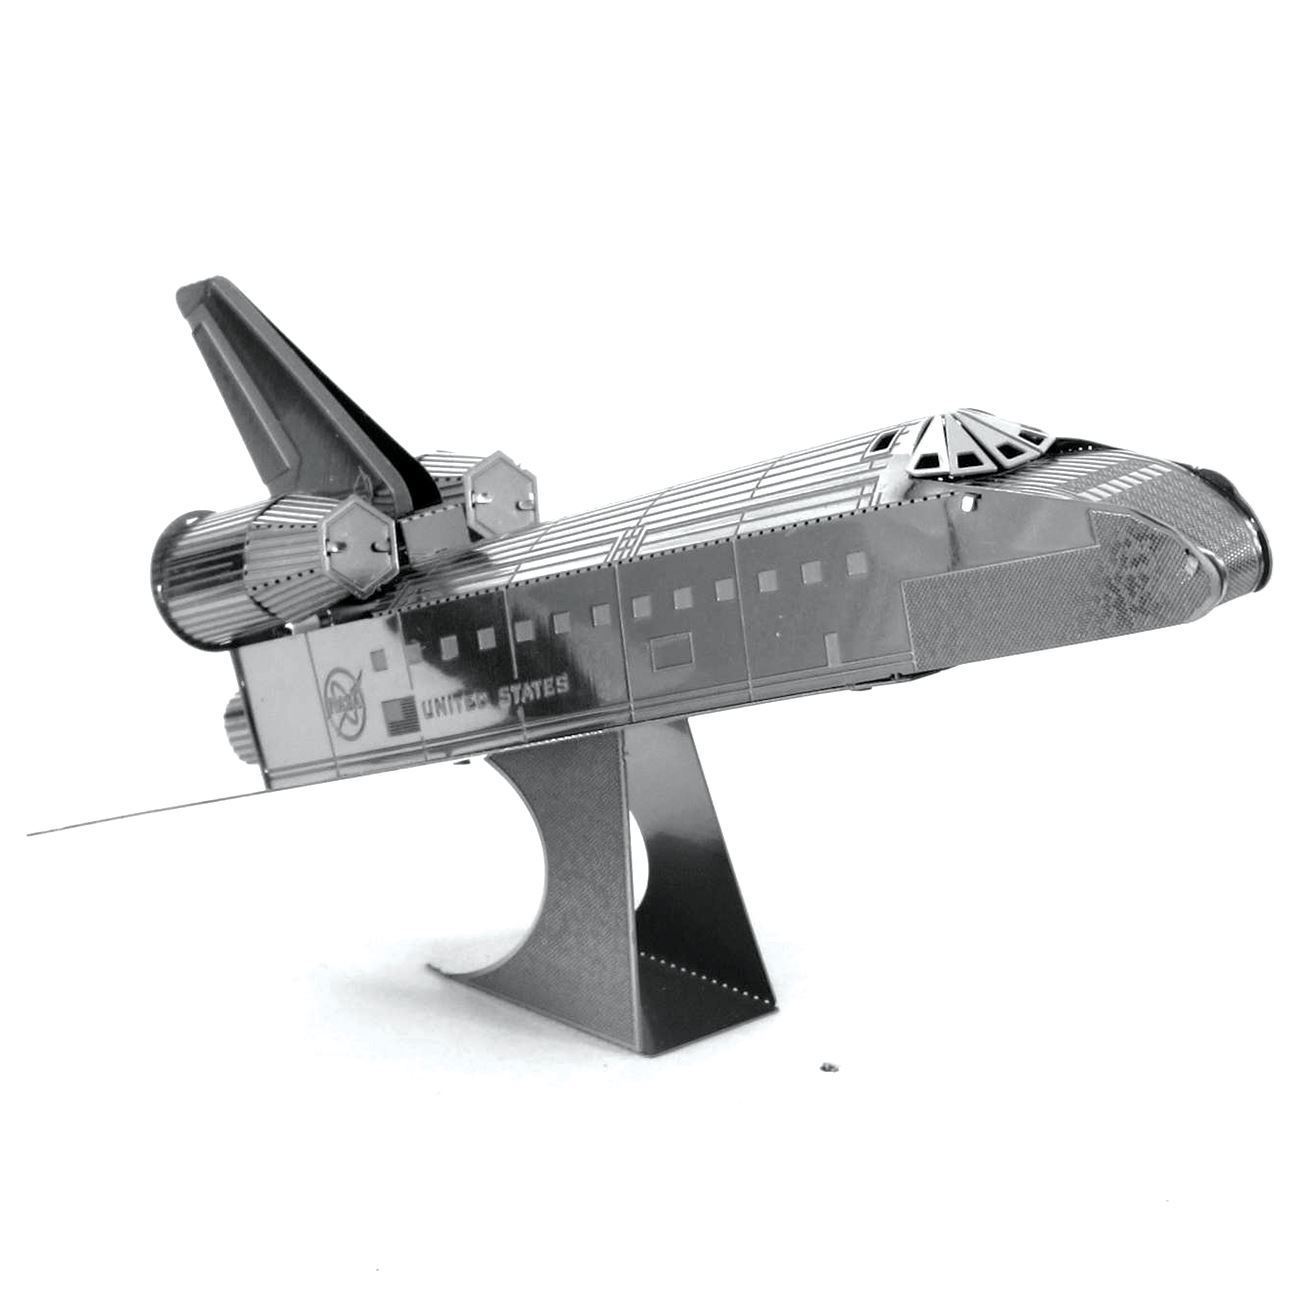 SET of 2 Fascinations Metal Earth Space Shuttle ATLANTIS & DISCOVERY Model Kits 